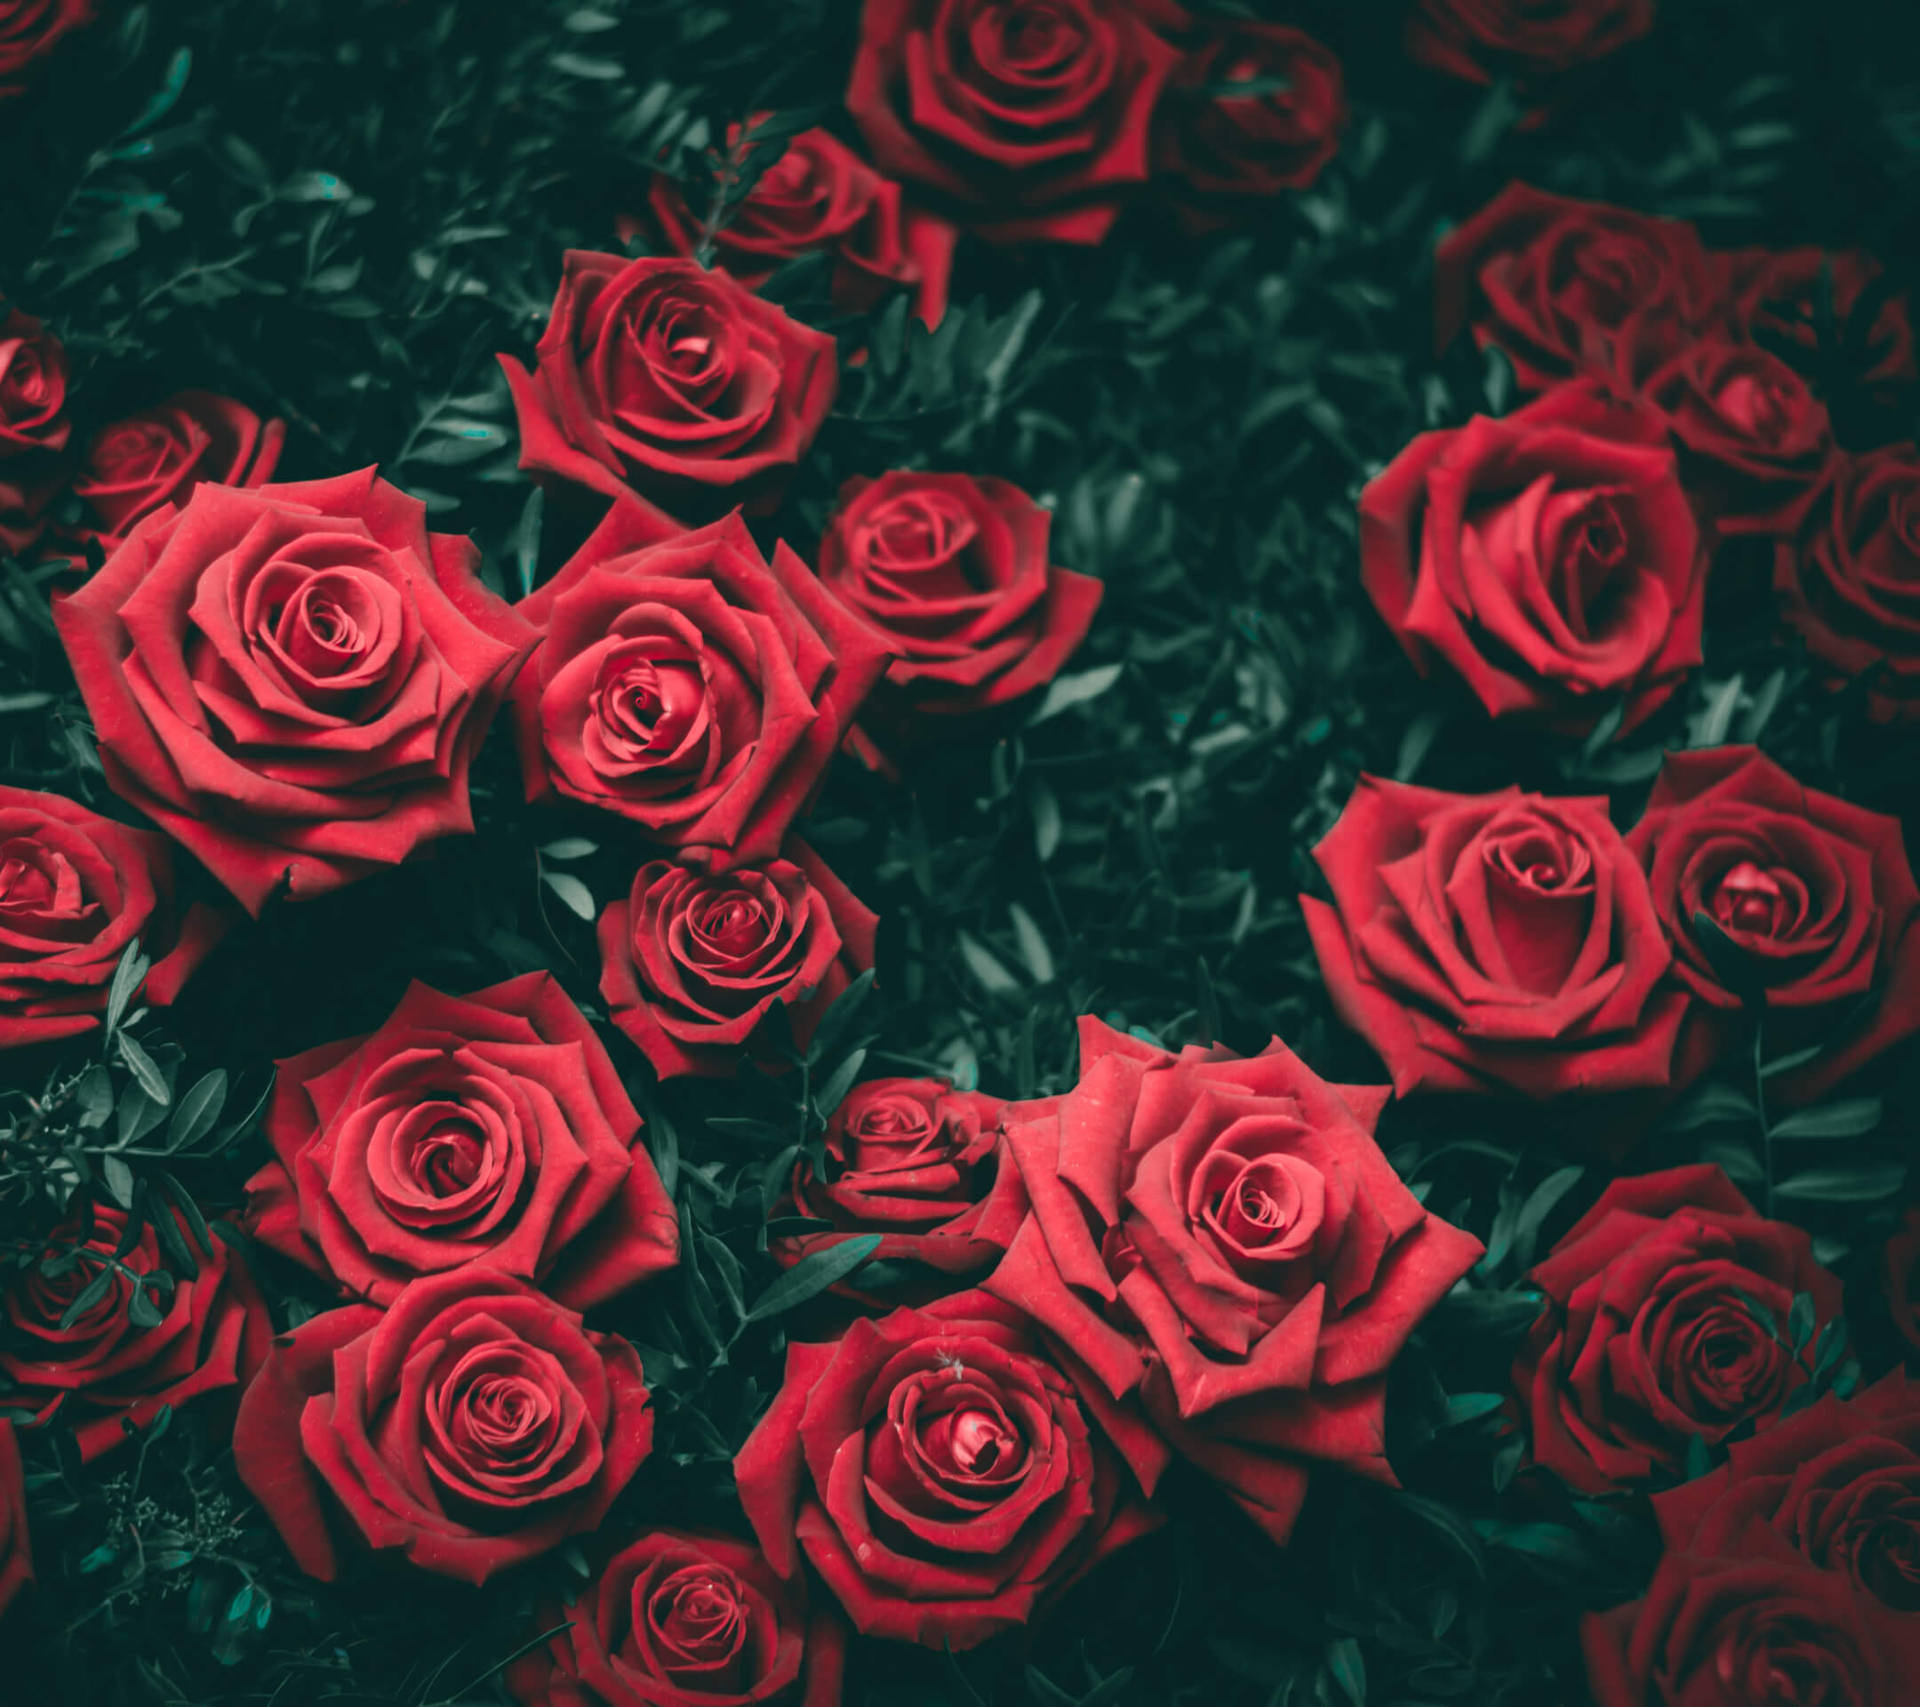 Bunch Of Red Roses Image Wallpaper